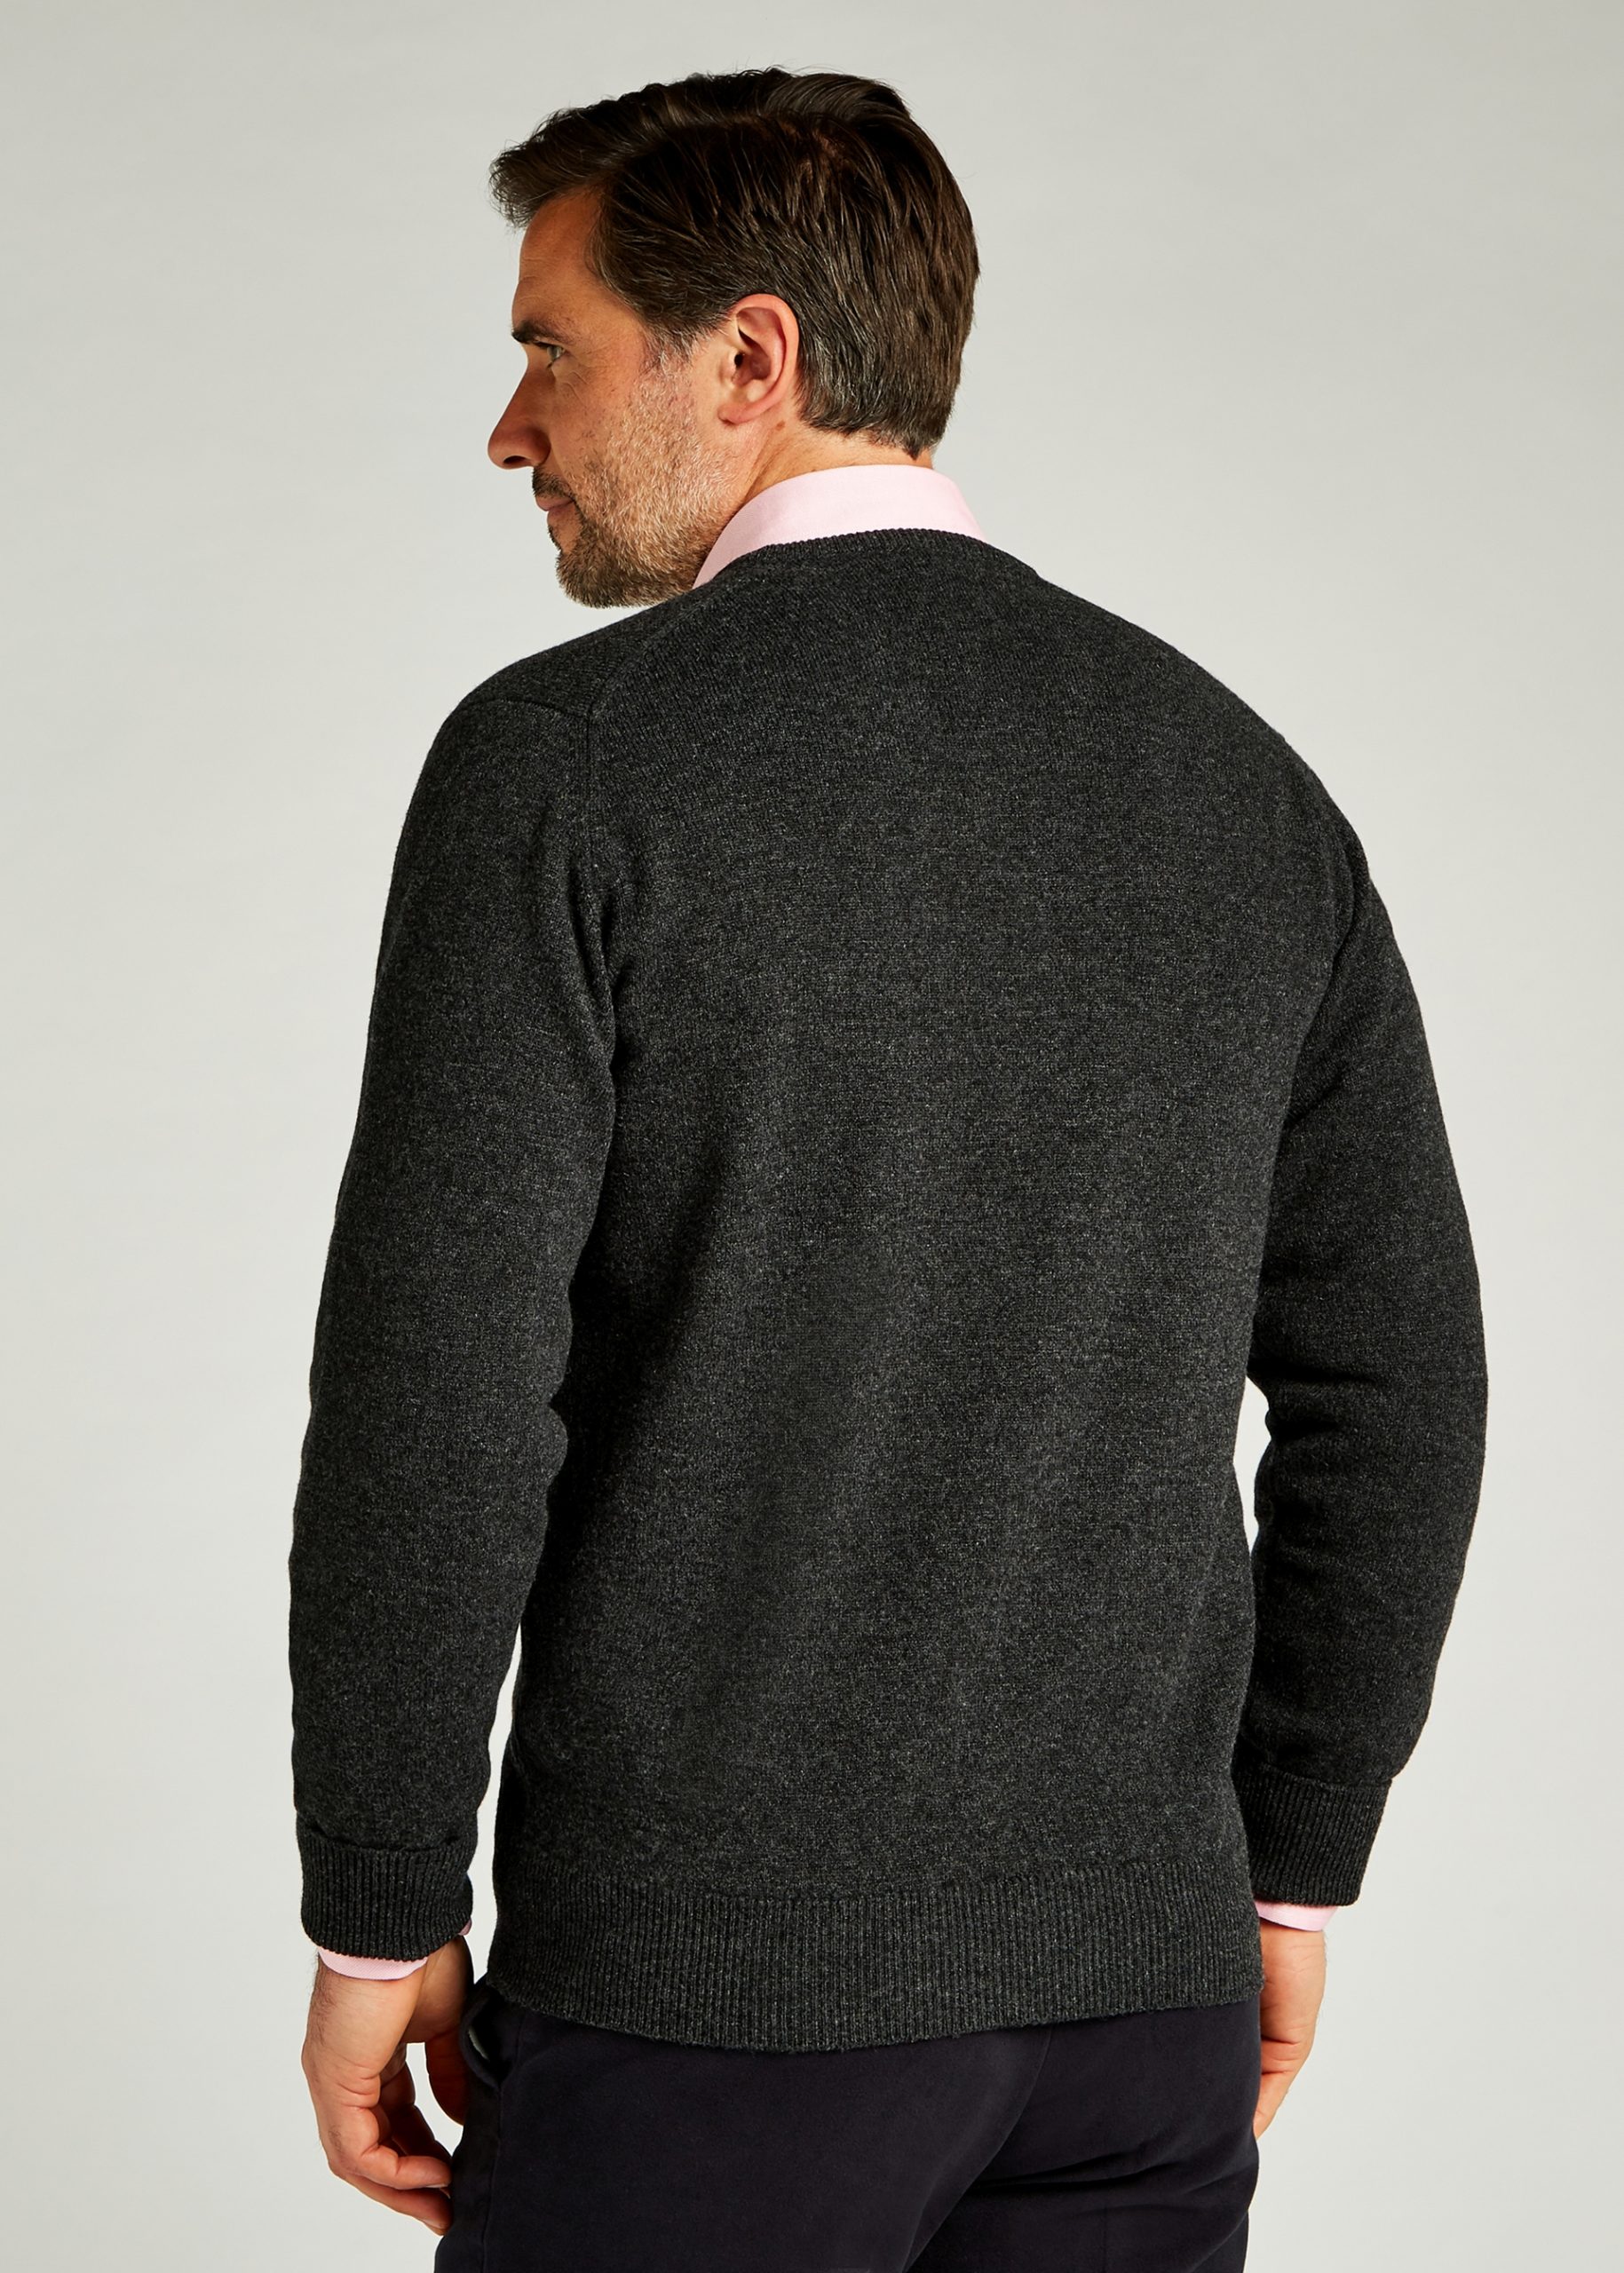 Charcoal v neck sweater by Roderick Charles